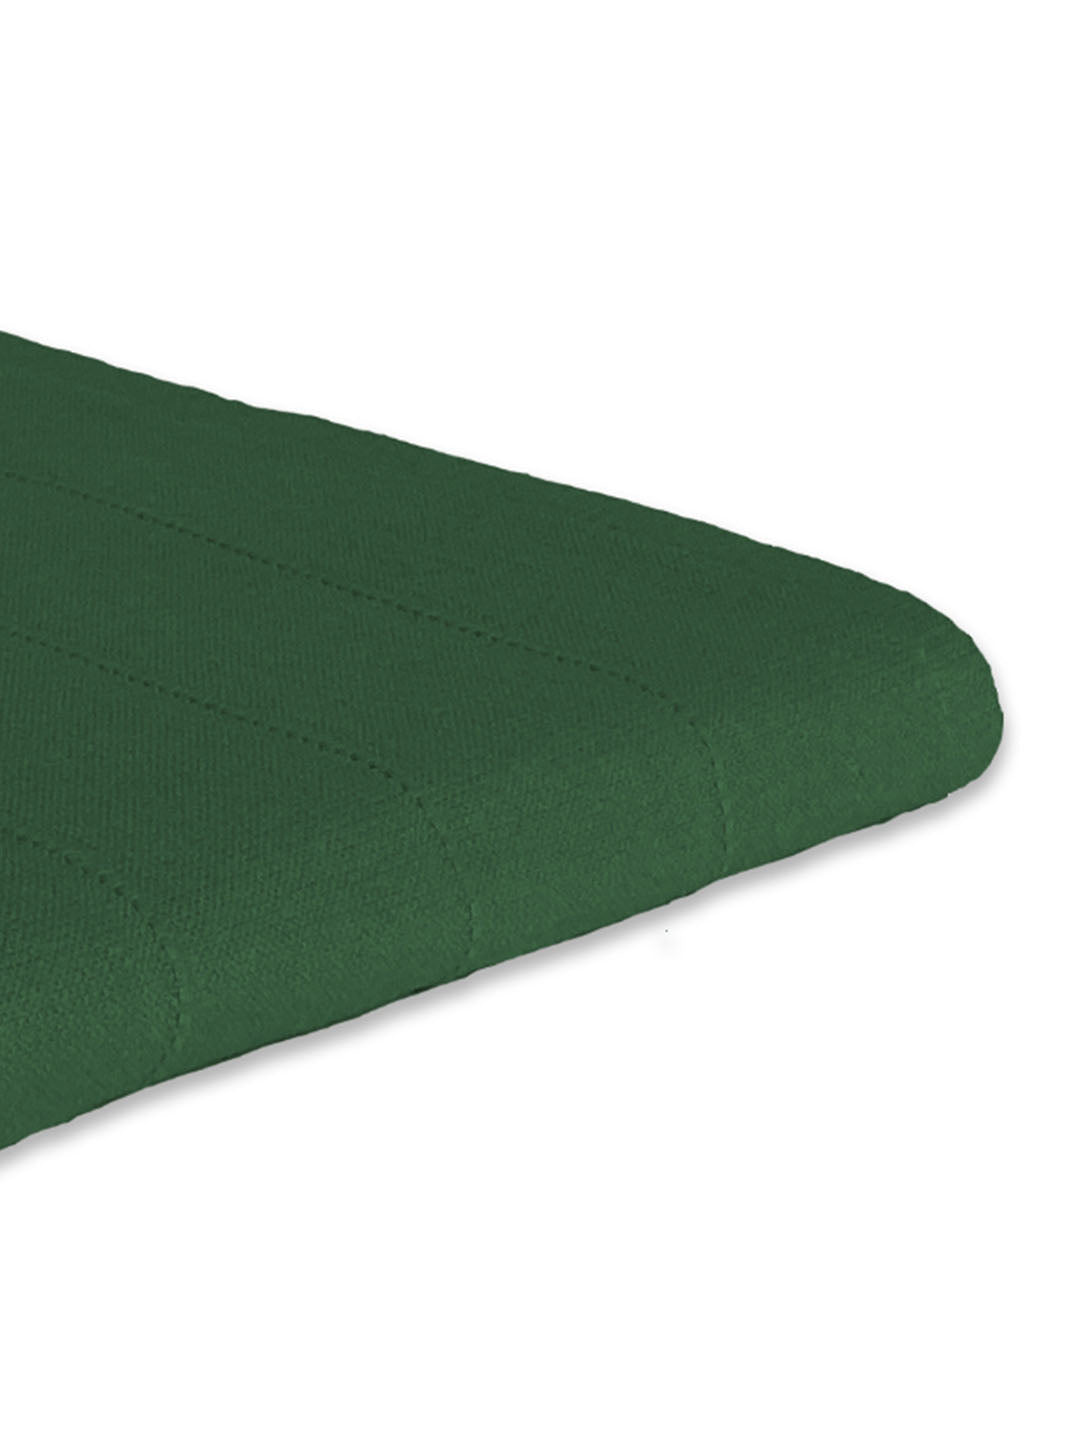 Spaces Livlite 250 GSM Solid Large Bath Towel (Green)